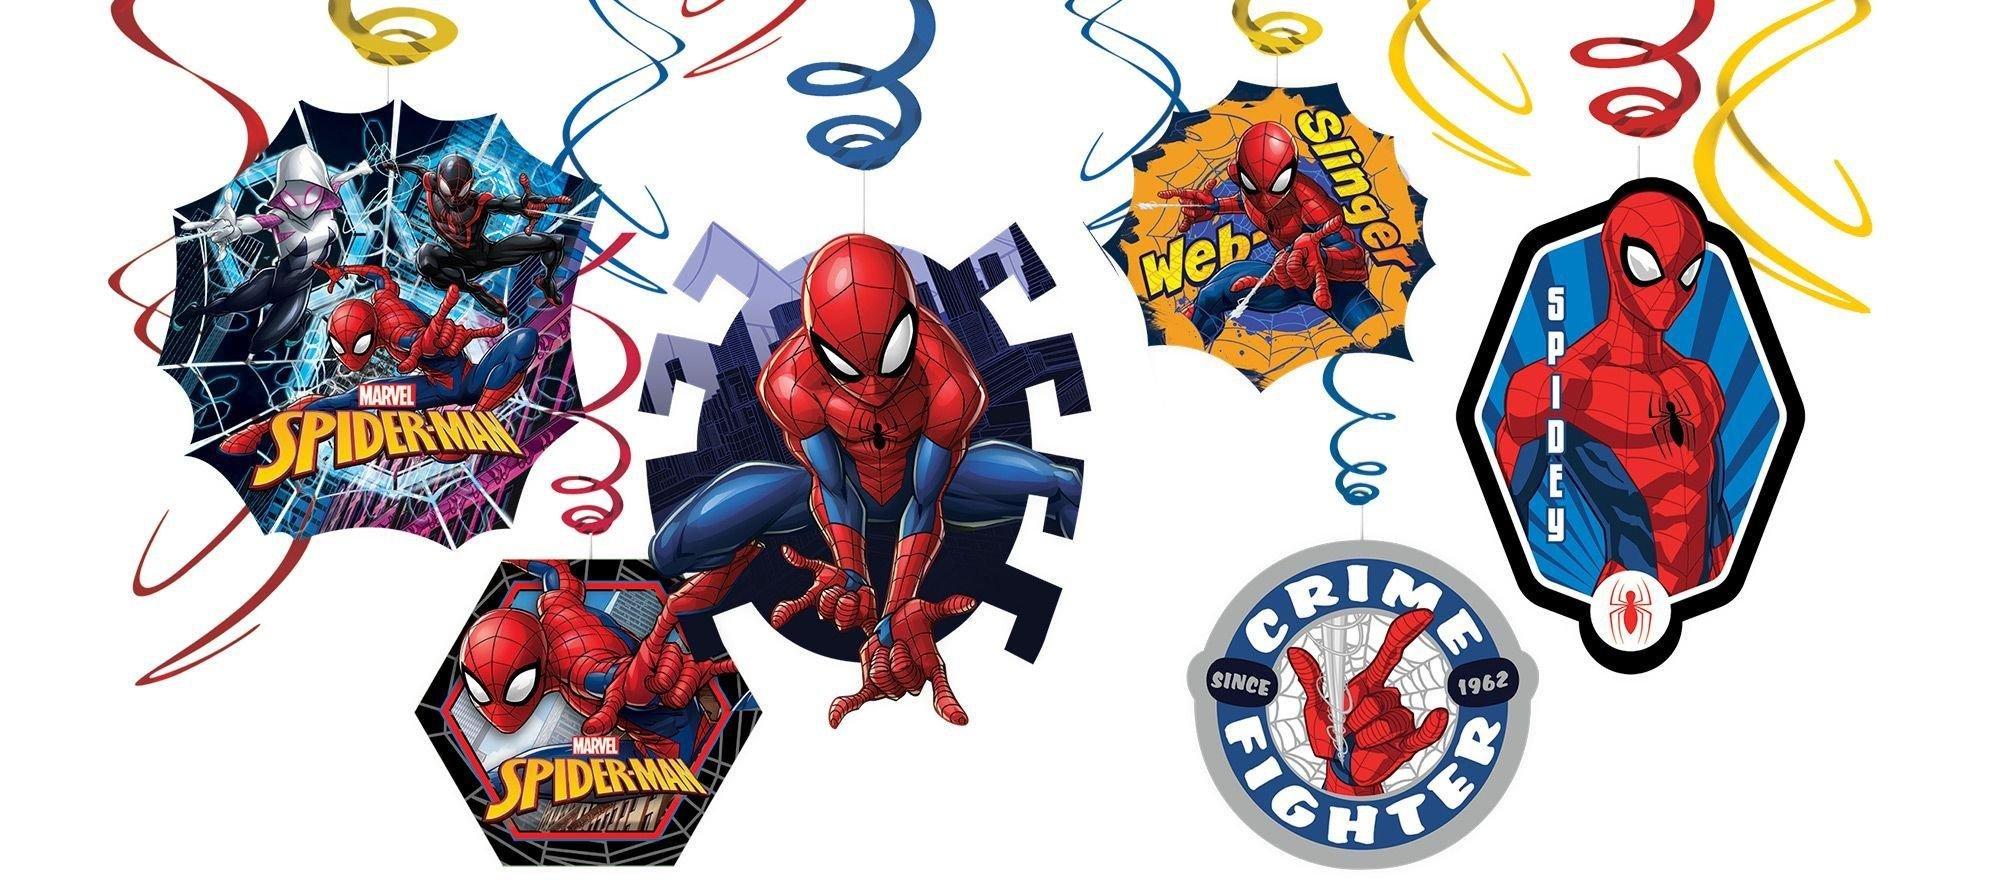 Spider-Man Webbed Wonder Party Decorating Supplies Pack - Kit Includes Banners, Swirl Decorations & Scene Setter